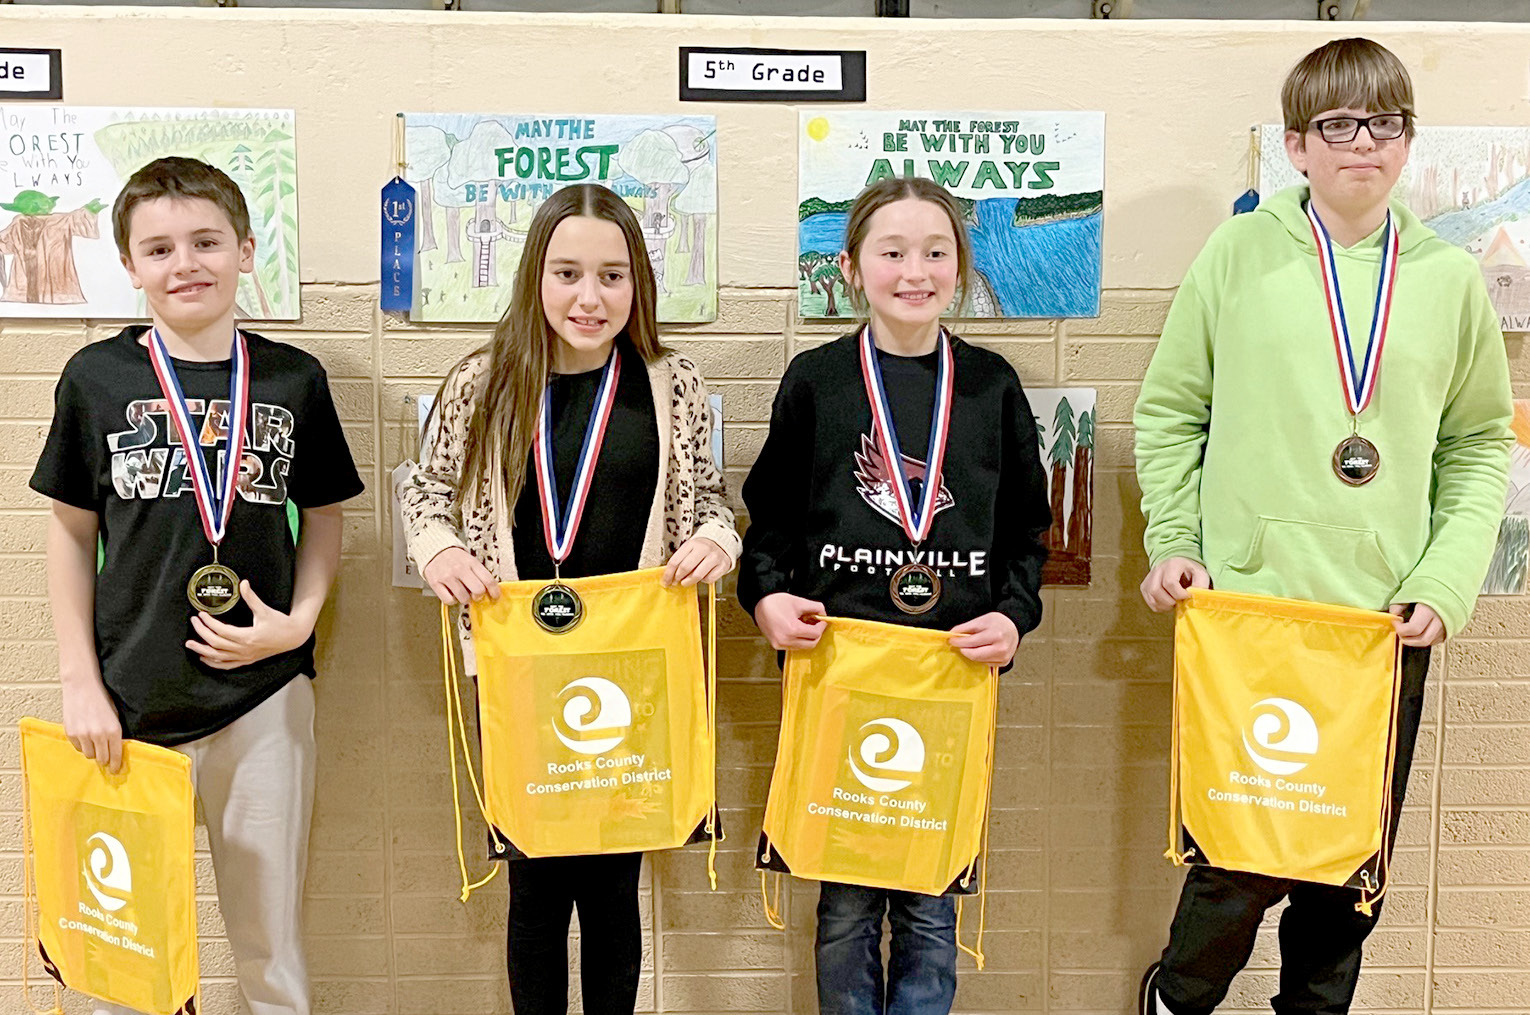 FIFTH-GRADE POSTER WINNERS (l to r)—1st, Brogan Pfaff, Plainville; 2nd, Kaylyn Becker, Sacred Heart; 3rd, Leilah Slaubaugh, Sacred Heart; and 4th, Vernon Waters, Stockton.